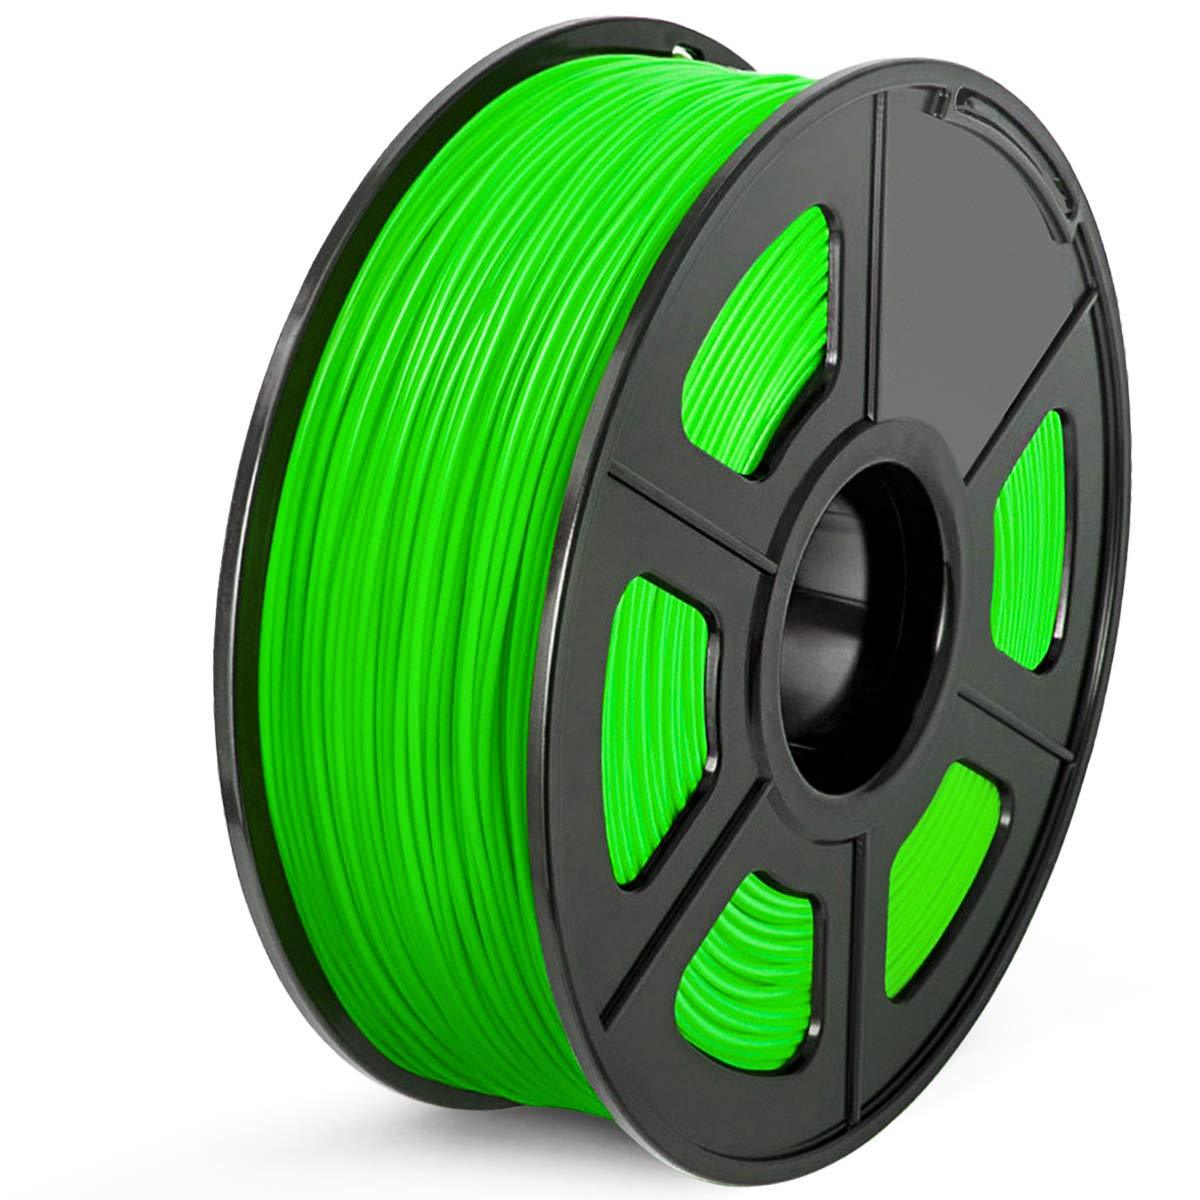 Green ABS 3D Printer Filament 1.75mm 1Kg Spool (2.2lbs), Dimensional Accuracy of +/- 0.02mm